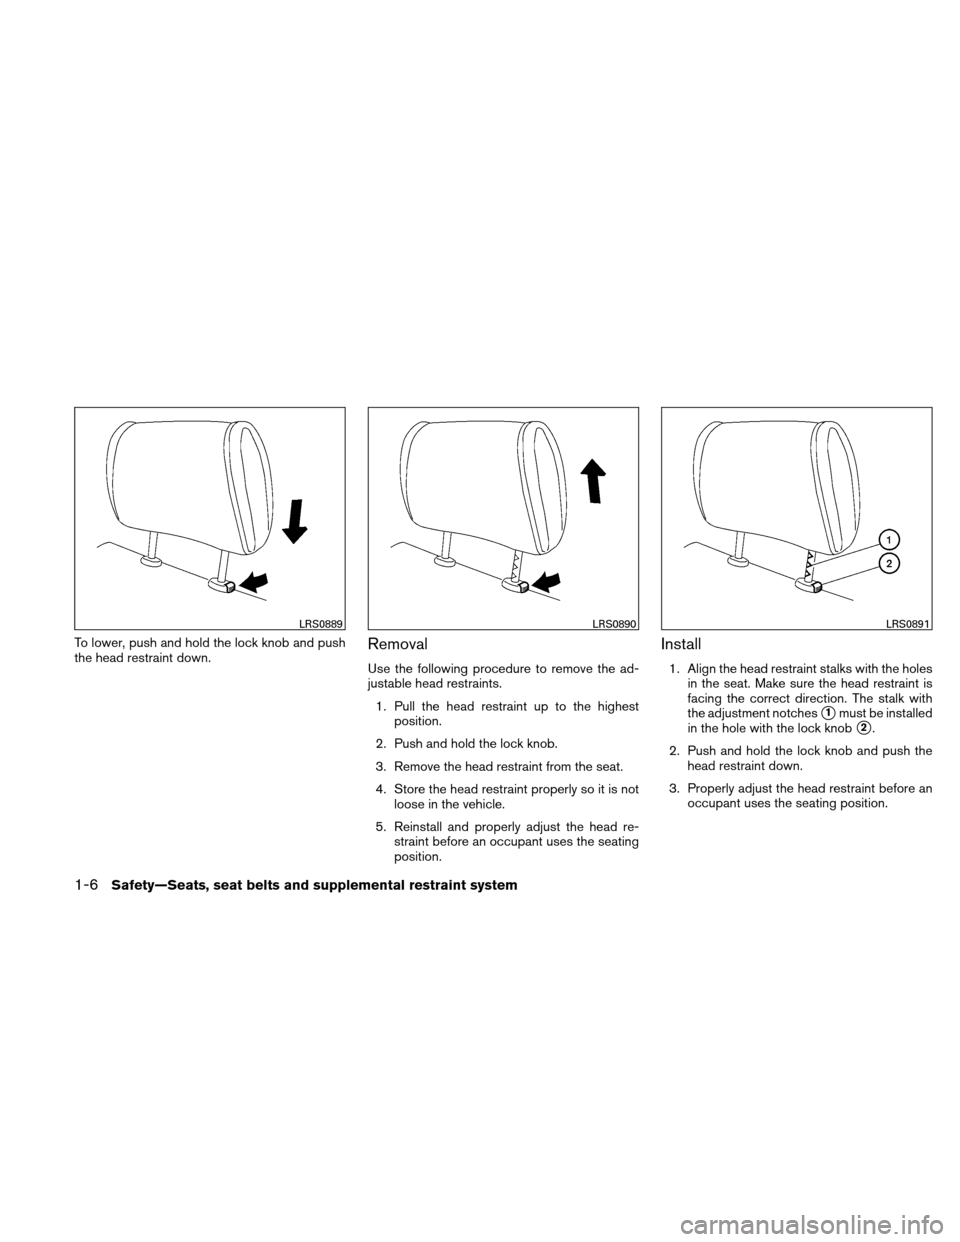 NISSAN XTERRA 2011 N50 / 2.G Owners Manual To lower, push and hold the lock knob and push
the head restraint down.Removal
Use the following procedure to remove the ad-
justable head restraints.1. Pull the head restraint up to the highest posit